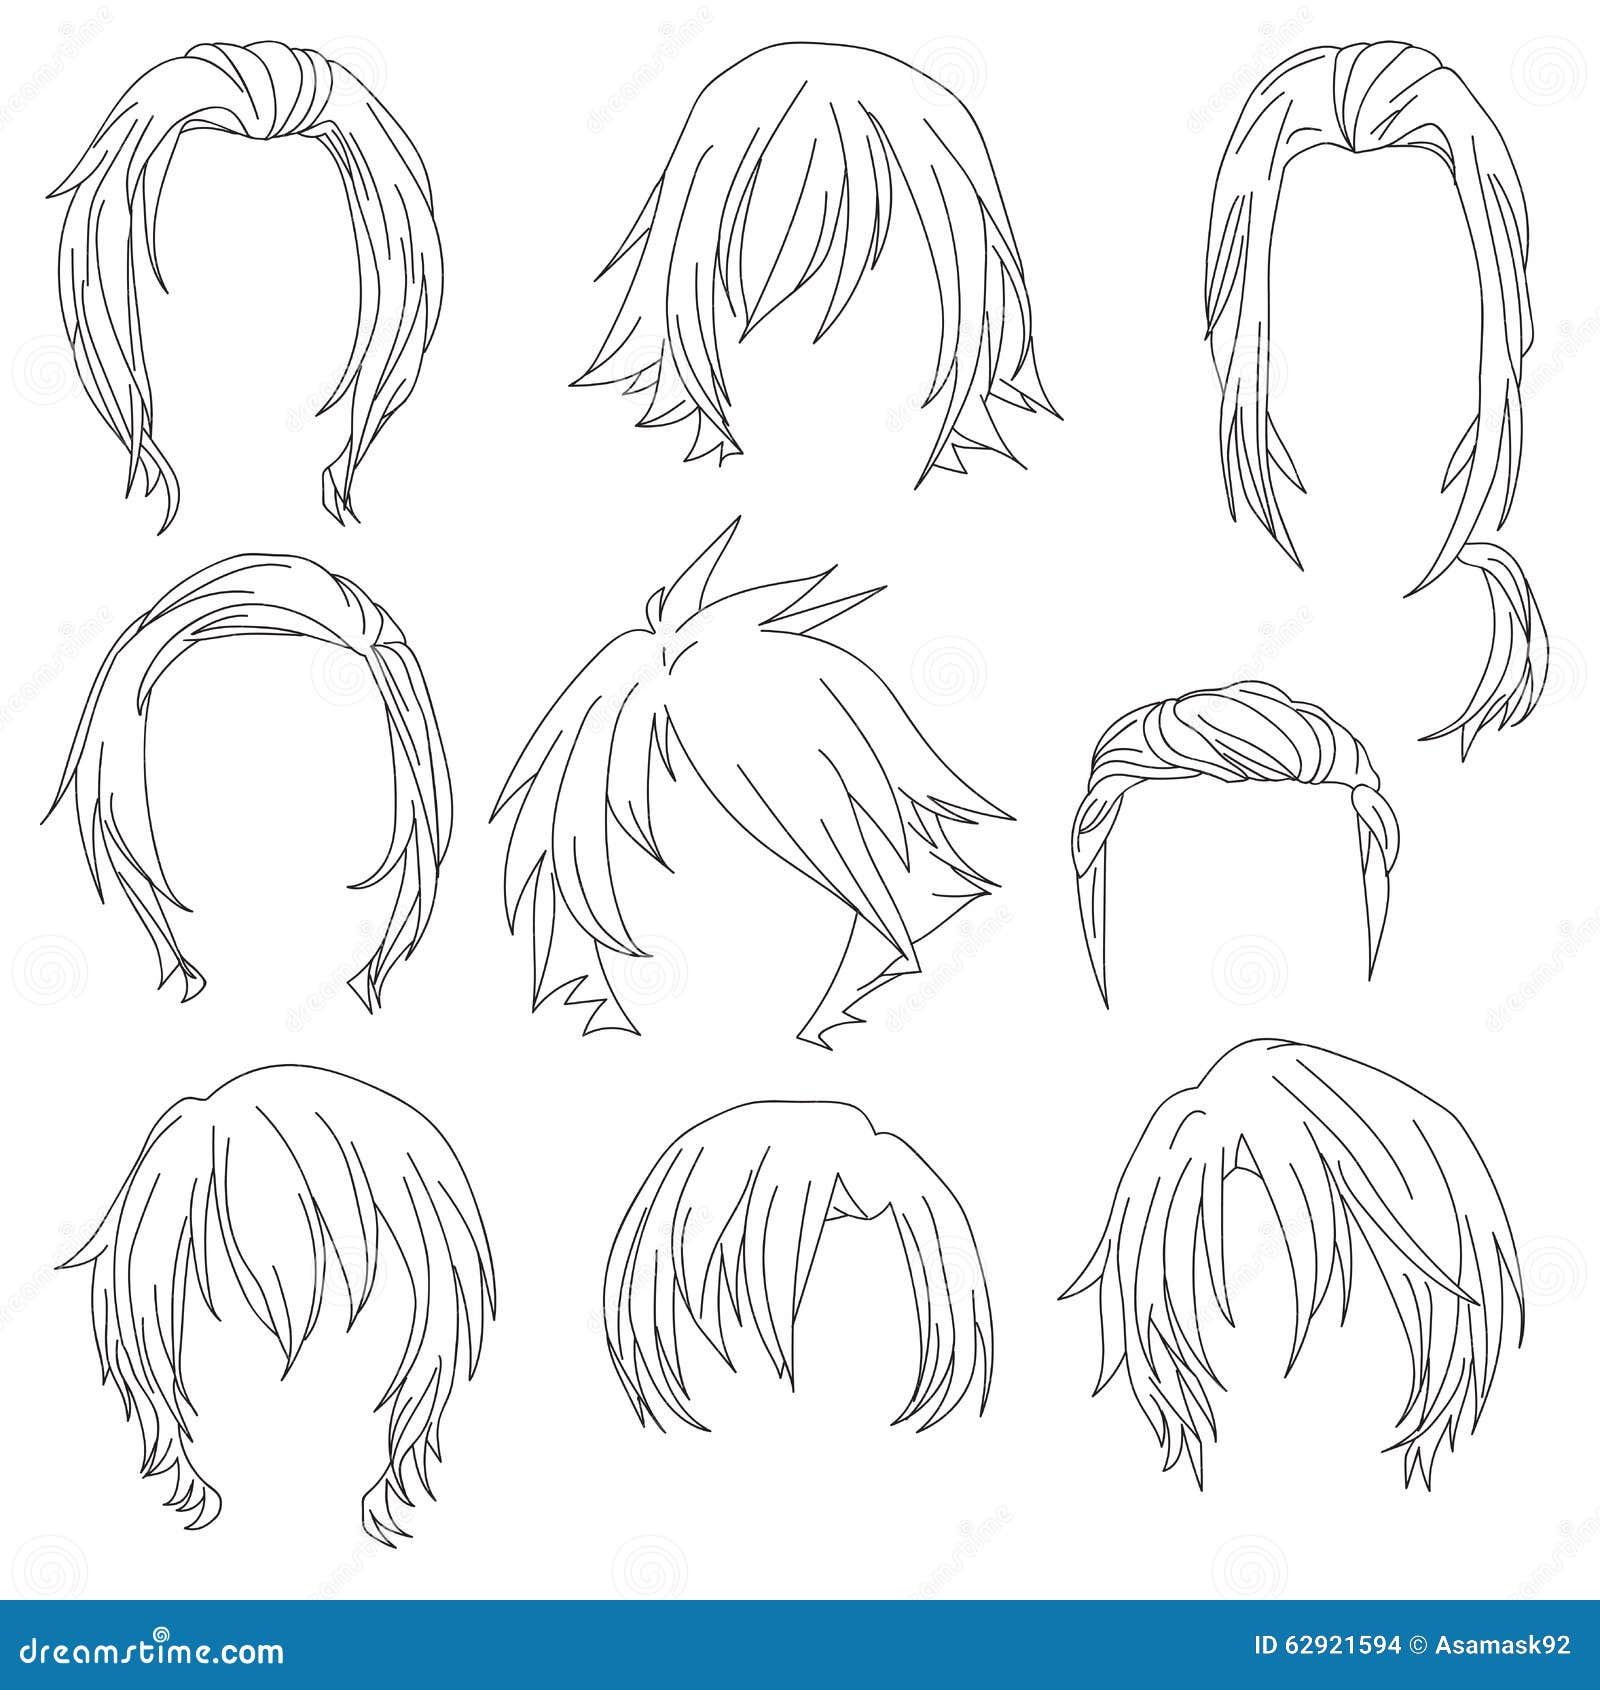 Curly male hair | Anime hairstyles male, Anime hair, How to draw hair